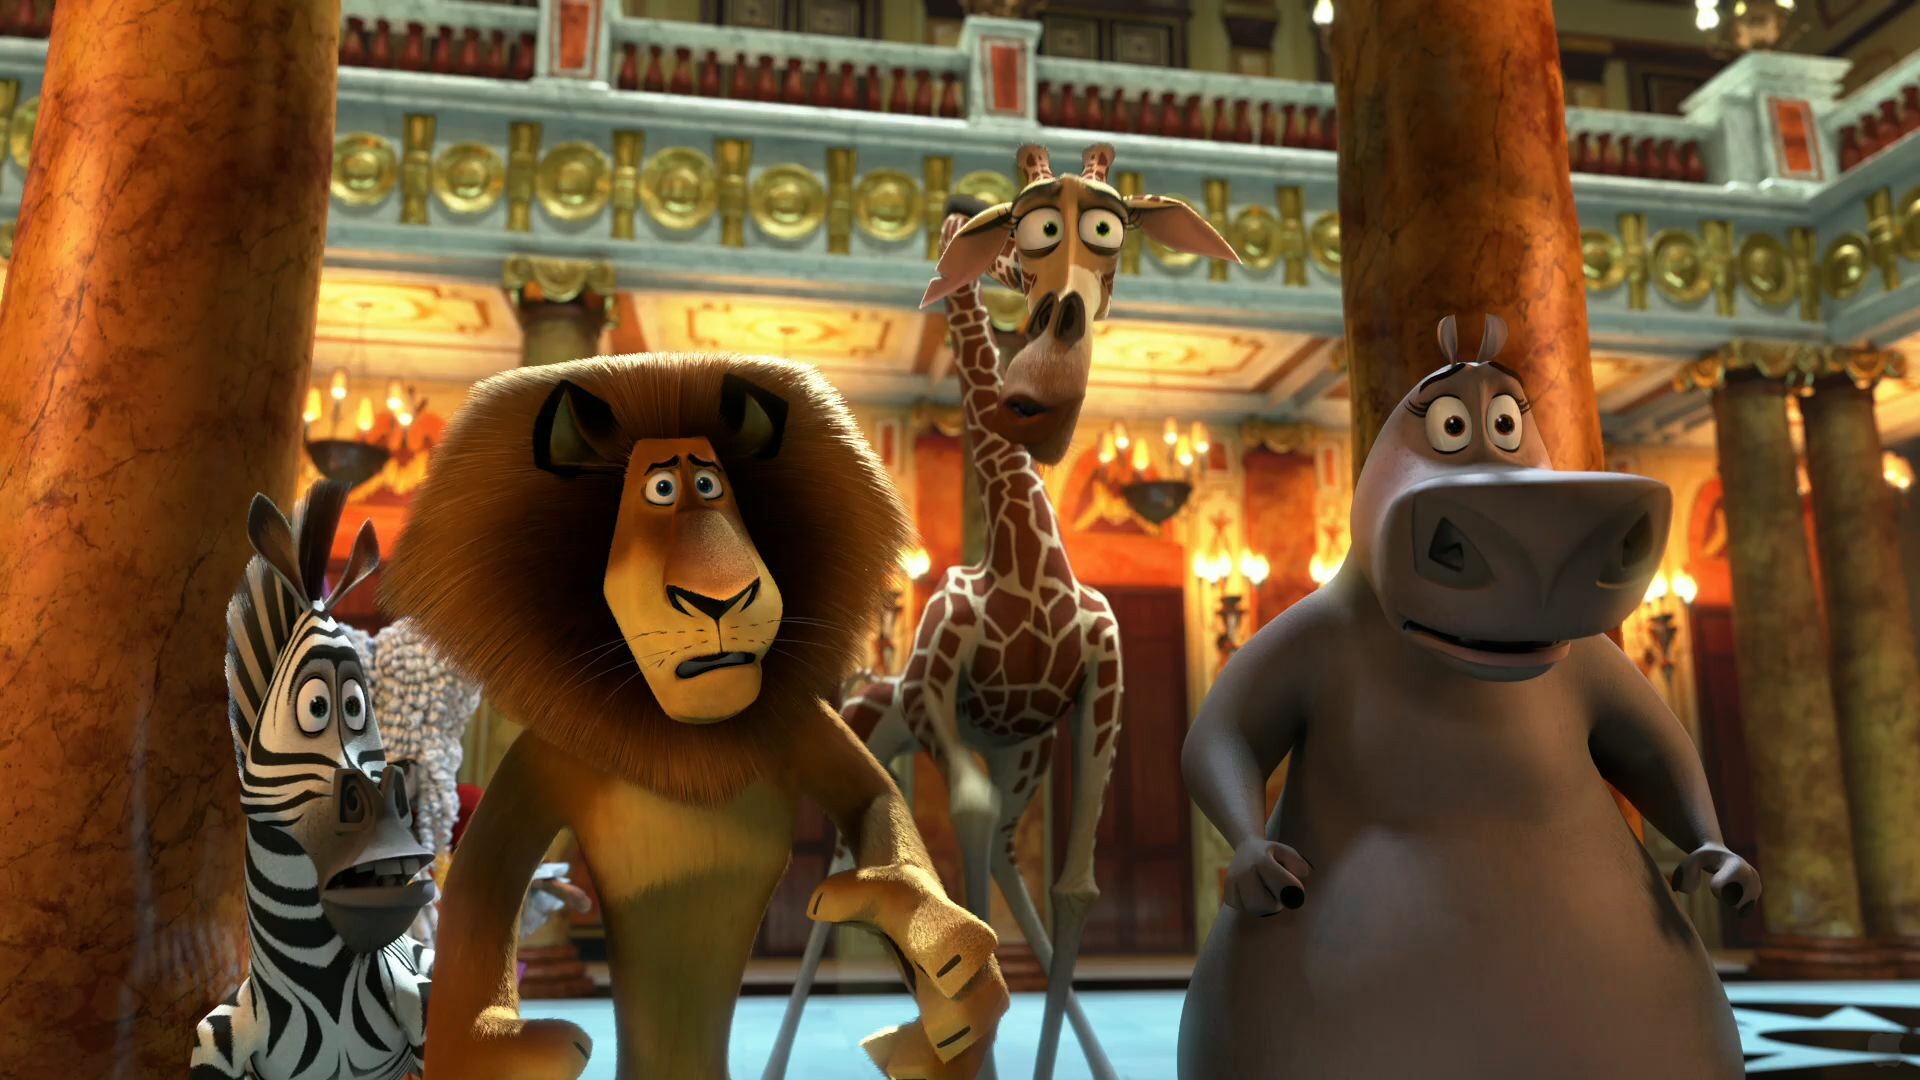 Madagascar (Movie): Europe's Most Wanted, The eighth highest-grossing film of 2012. 1920x1080 Full HD Background.